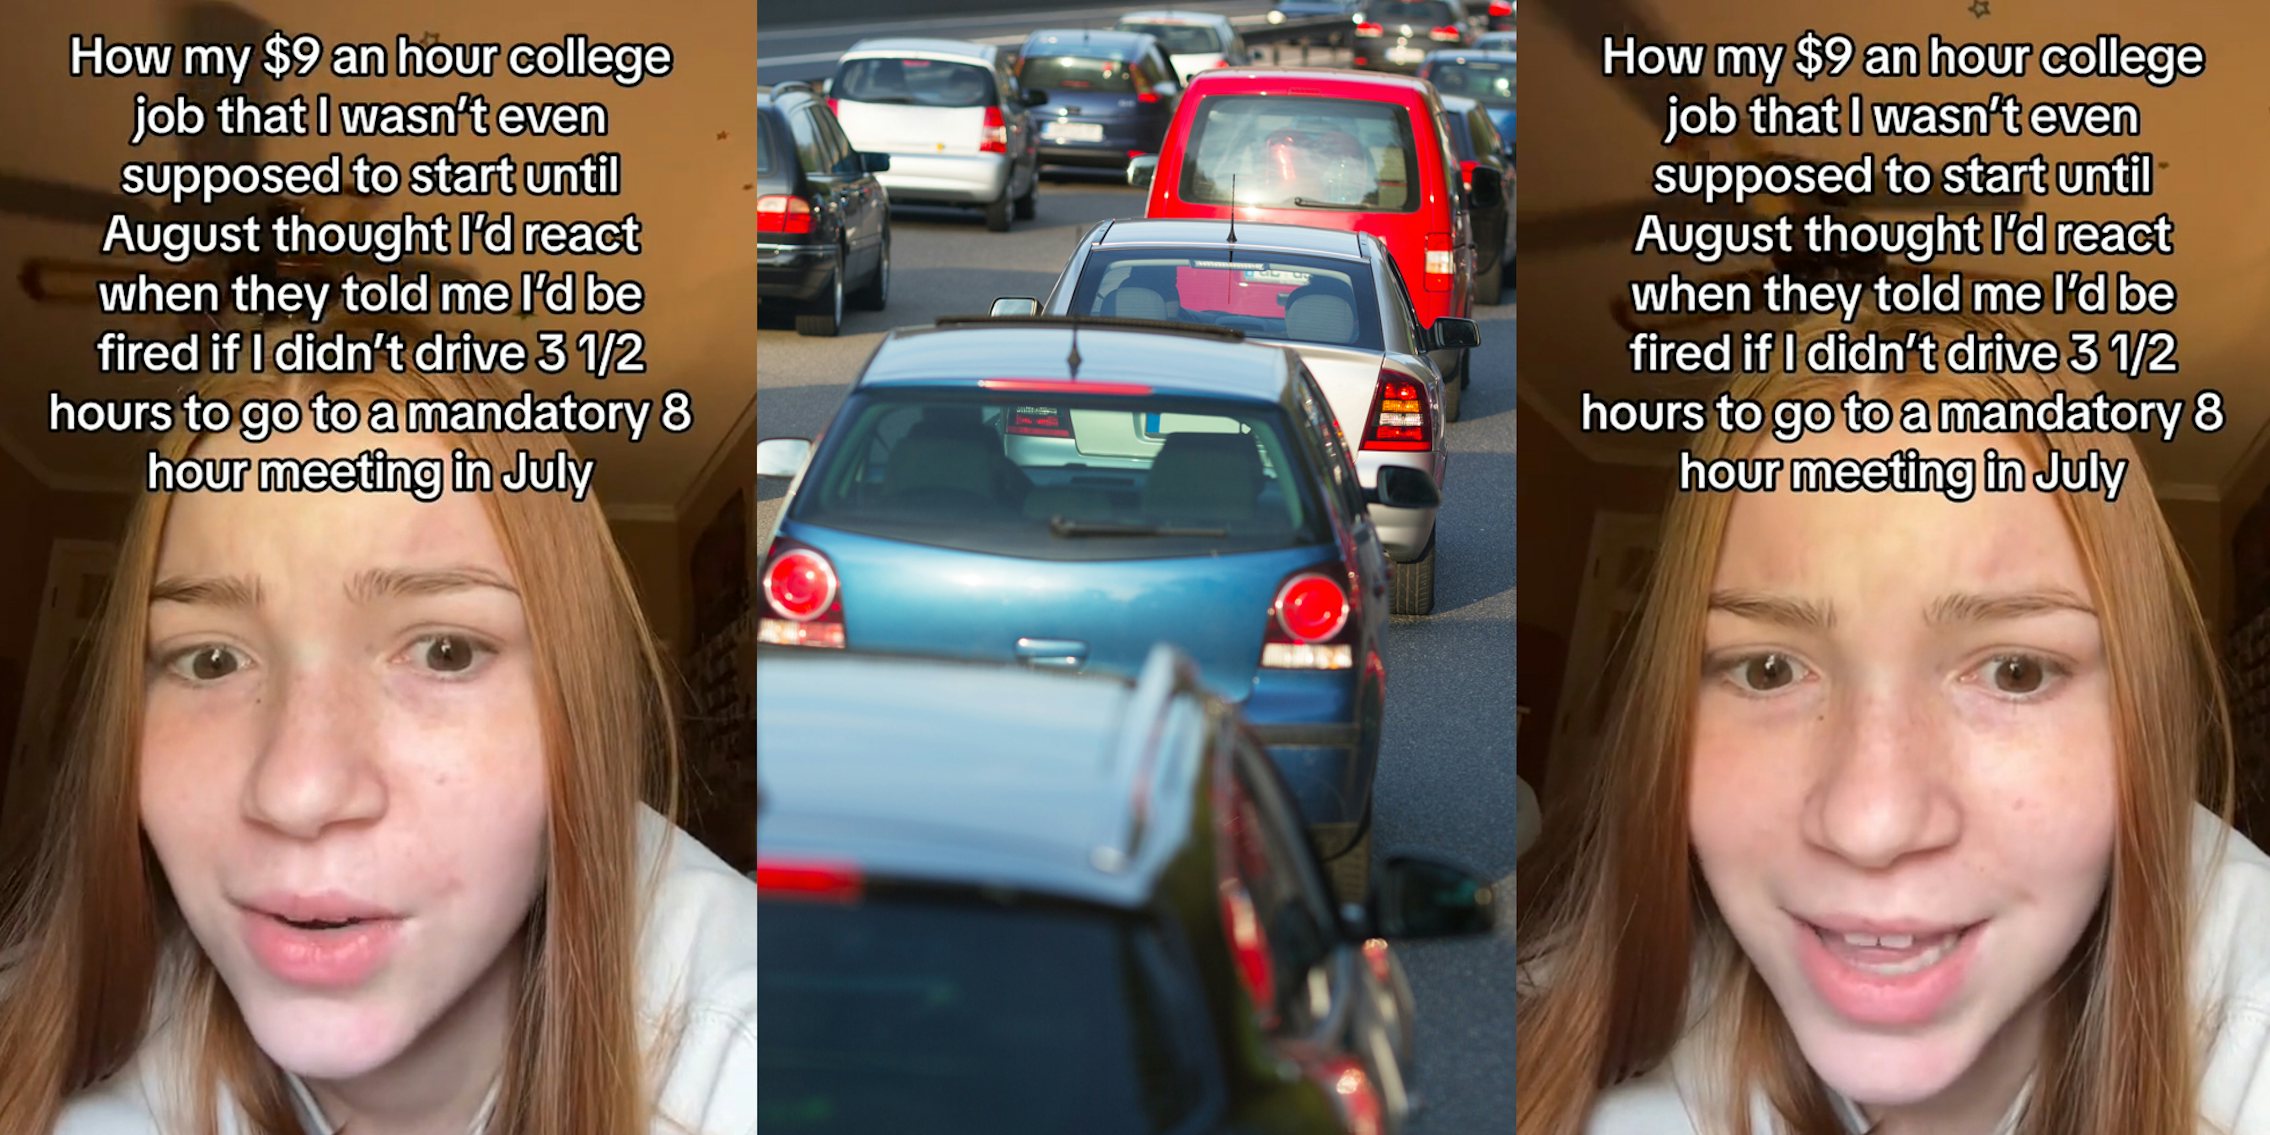 worker speaking with caption 'How my $9 an hour college job that I wasn't even supposed to start until August thought I'd react when they told me I'd be fired if I didn't drive 3 1/2 hours to go to a mandatory 8 hour meeting in July' (l) cars in traffic on freeway (c) worker speaking with caption 'How my $9 an hour college job that I wasn't even supposed to start until August thought I'd react when they told me I'd be fired if I didn't drive 3 1/2 hours to go to a mandatory 8 hour meeting in July' (r)